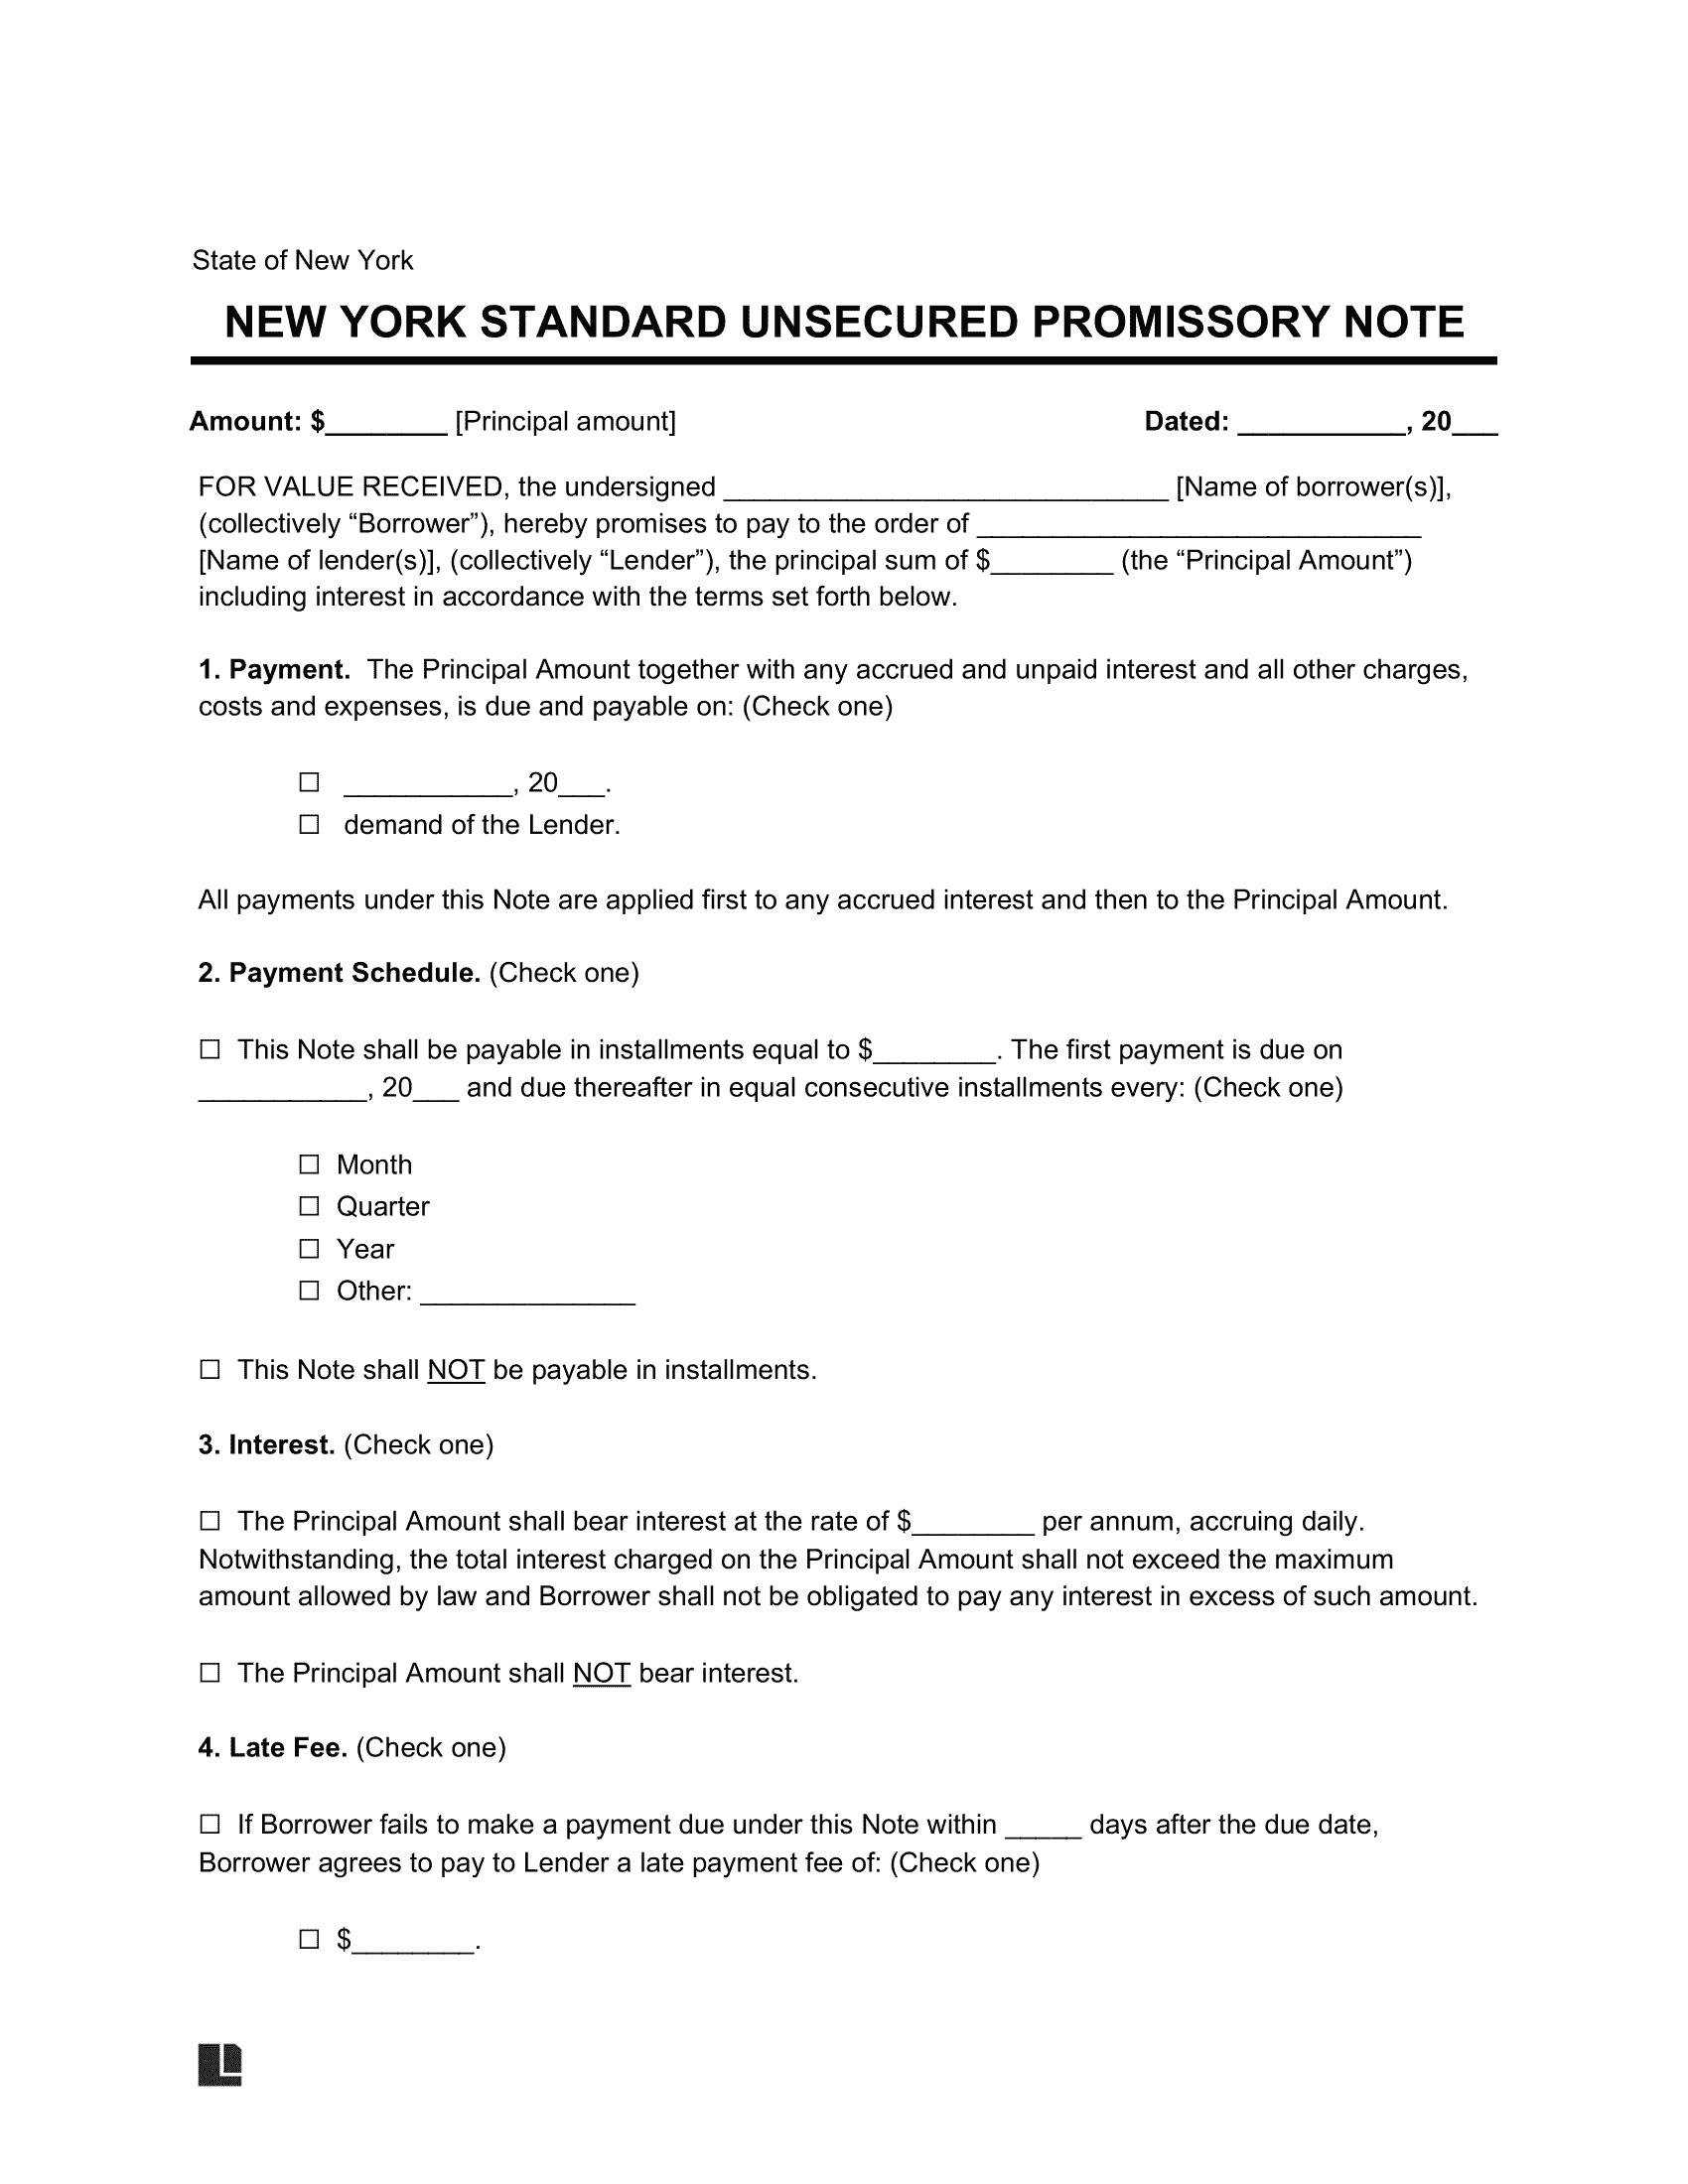 New York Standard Unsecured Promissory Note Template